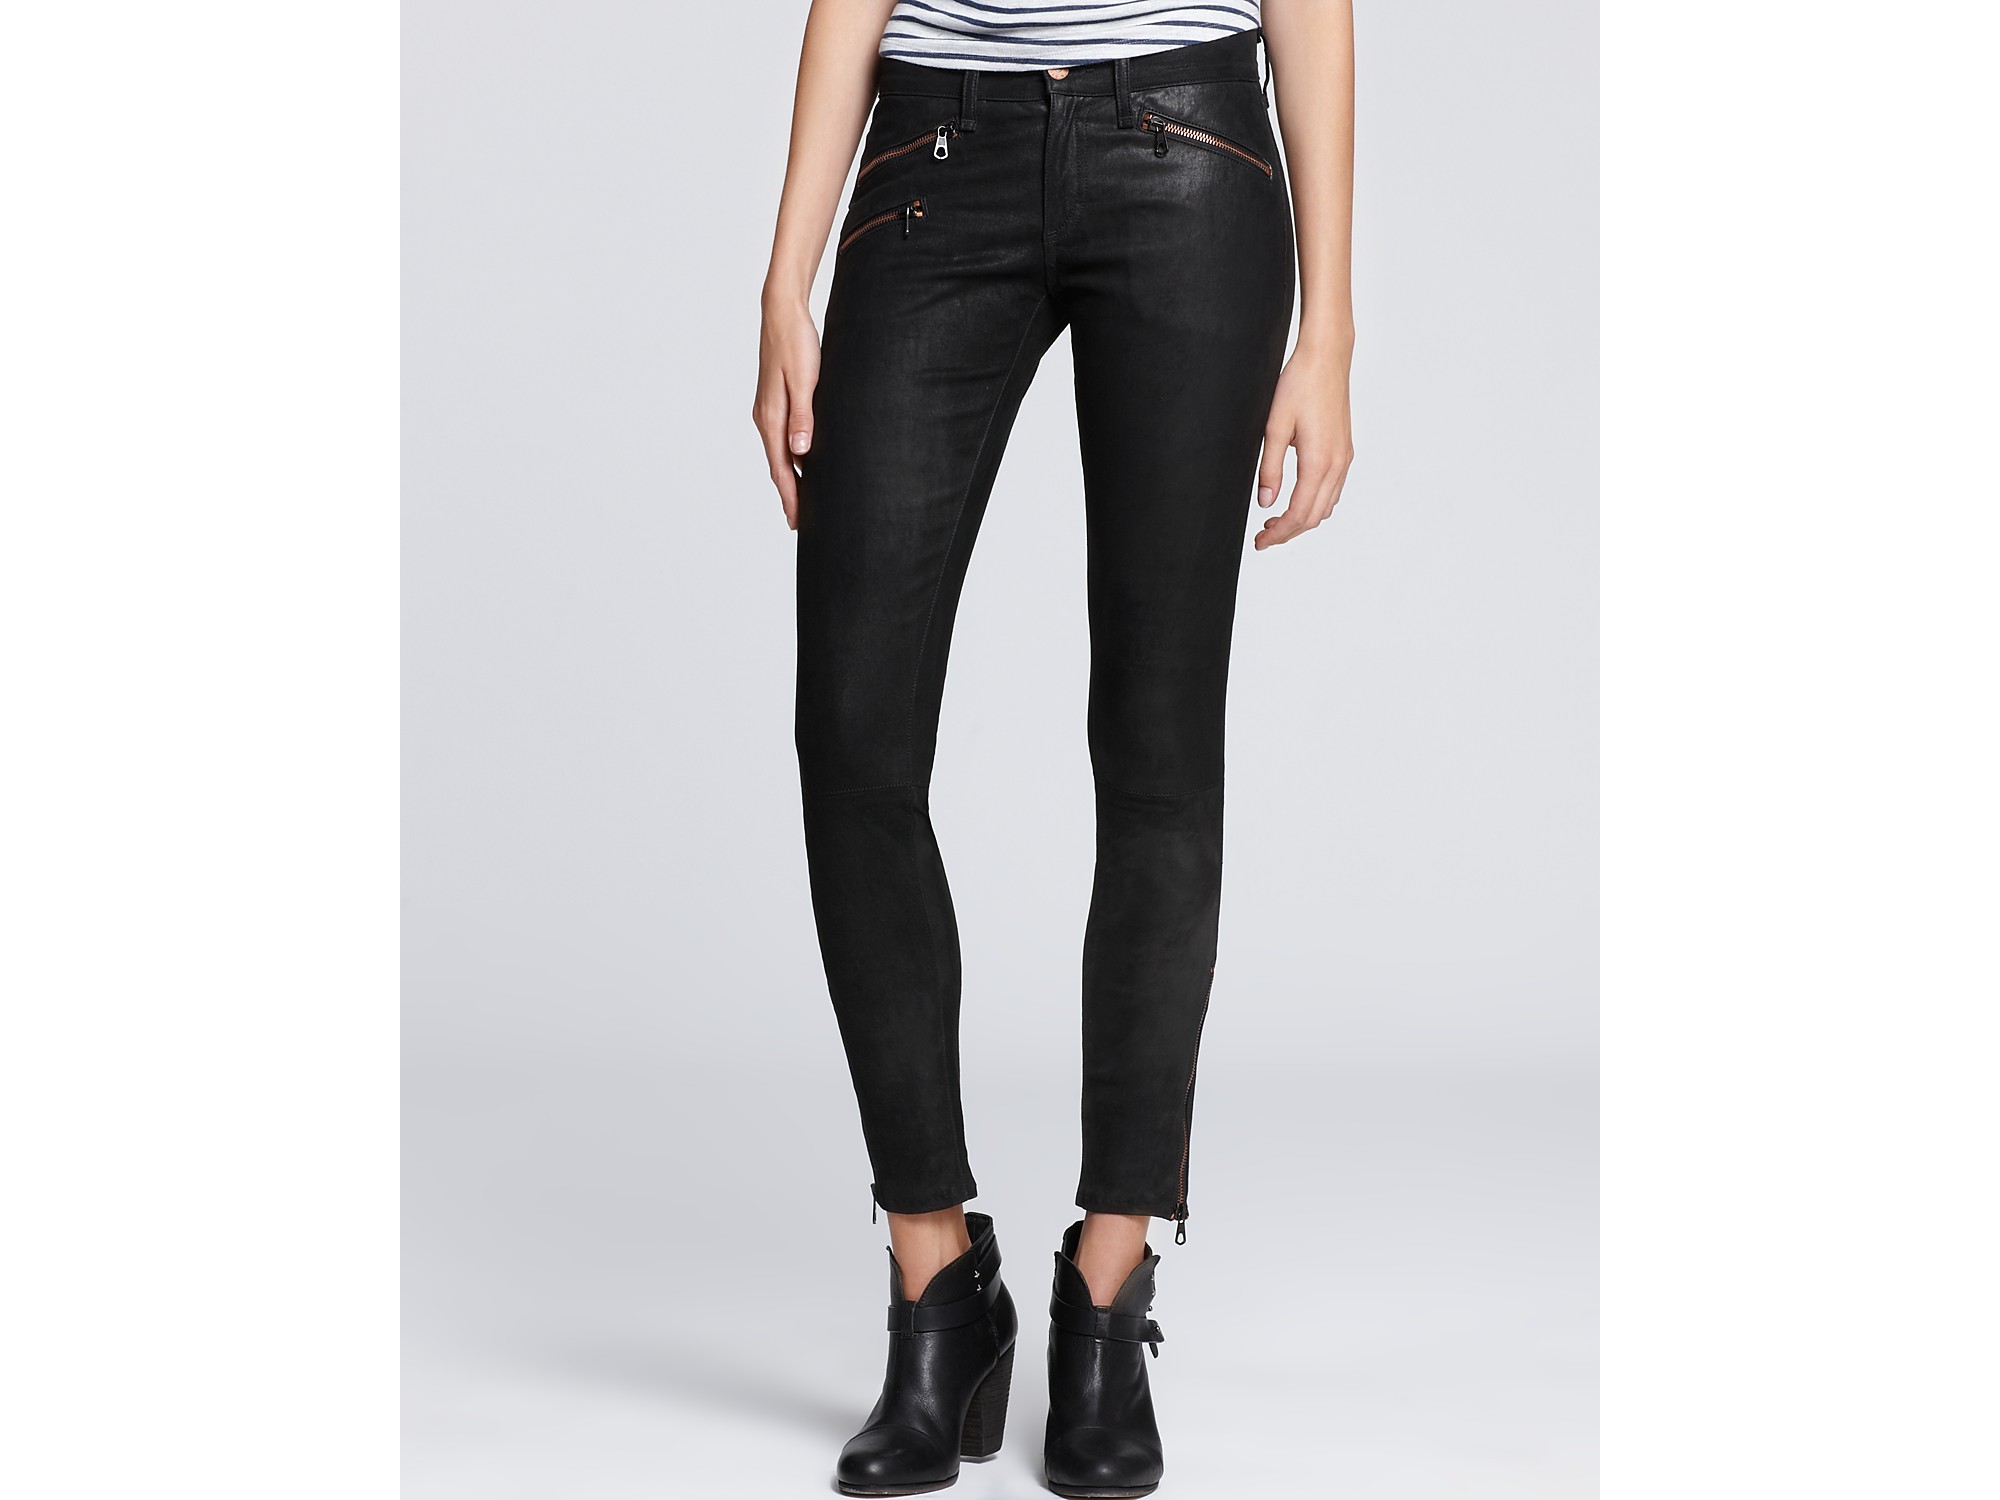 Lyst - Rag & Bone Leather Leggings Rbw 23 Mid Rise with Zippers in Black